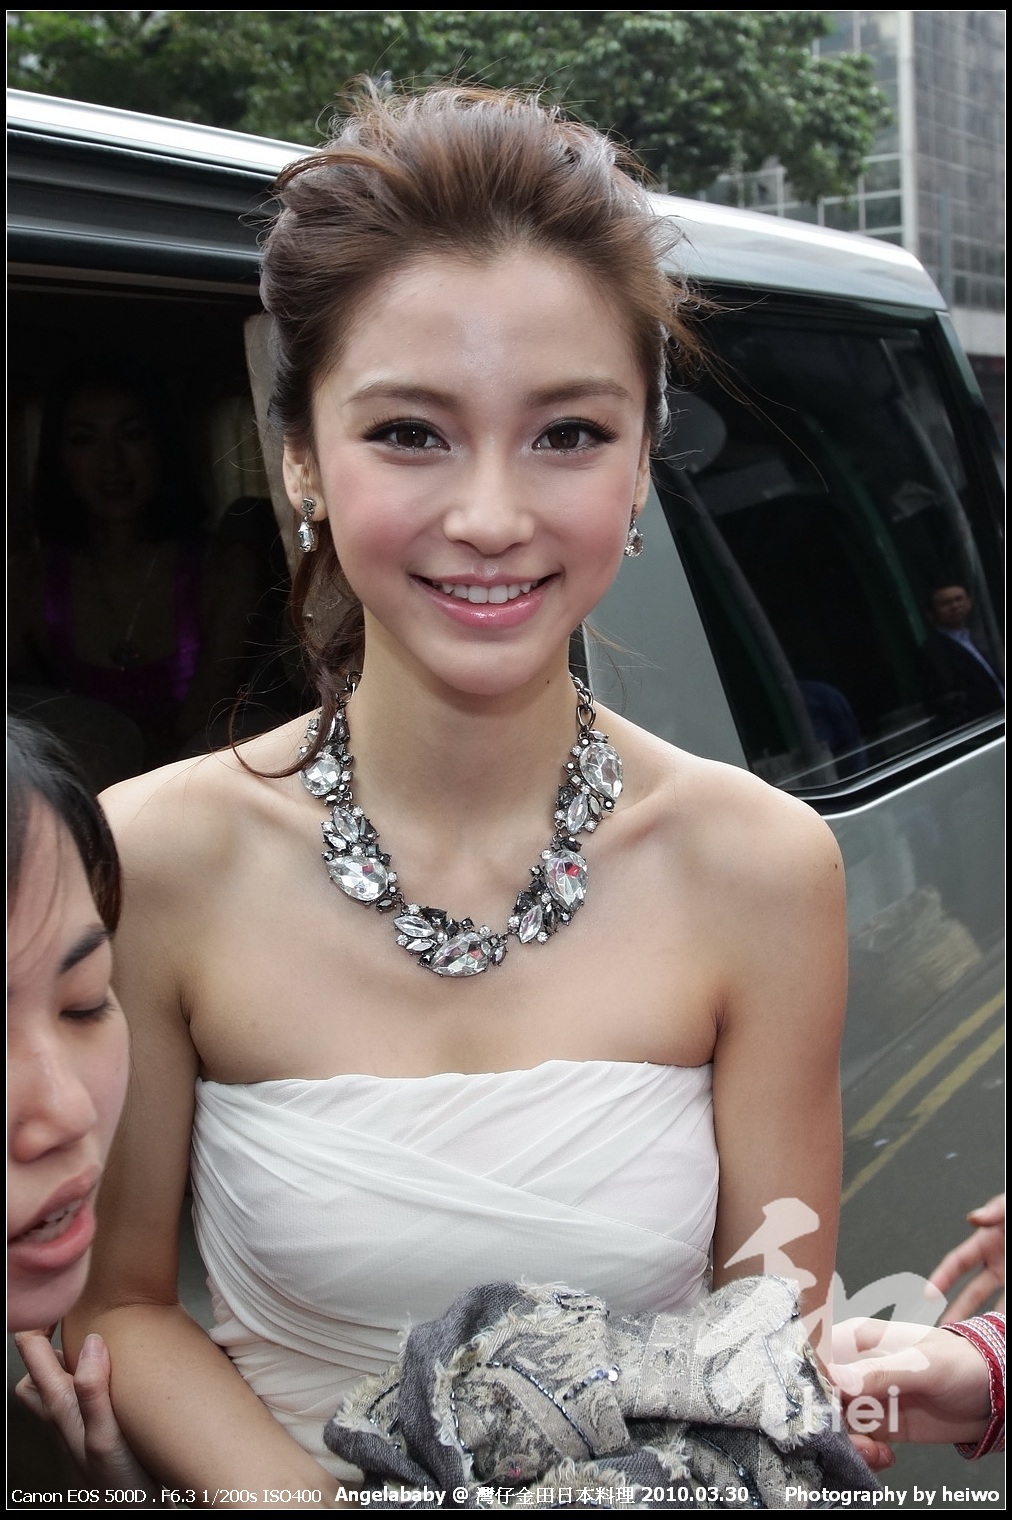 Angelababy Chinese Super Model, she is so cute page 